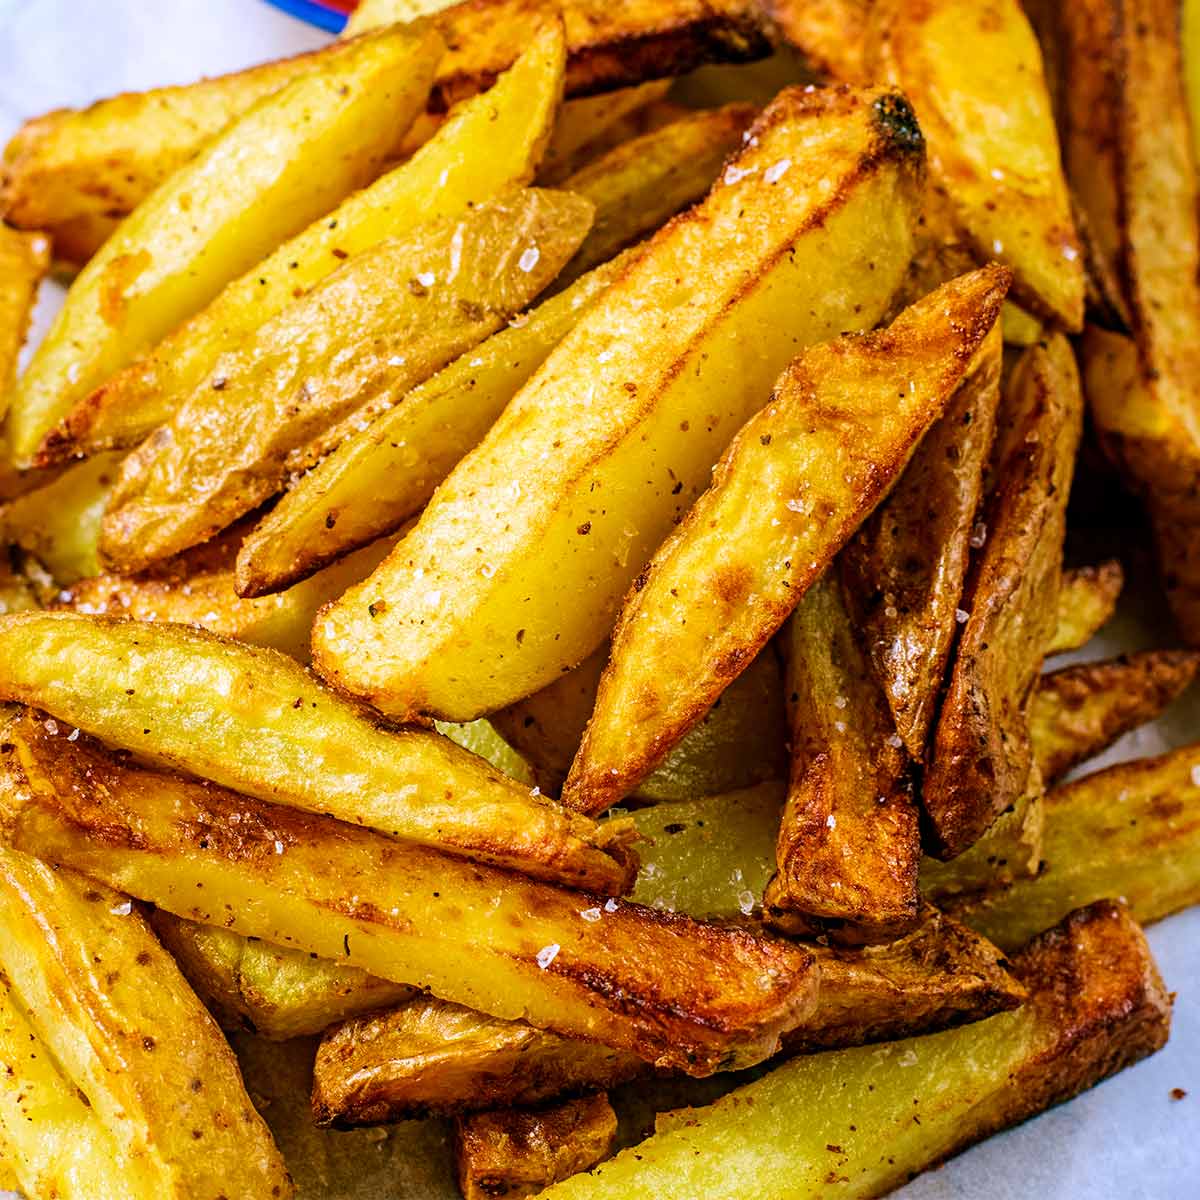 https://hungryhealthyhappy.com/wp-content/uploads/2022/06/air-fryer-chips-featured-d.jpg